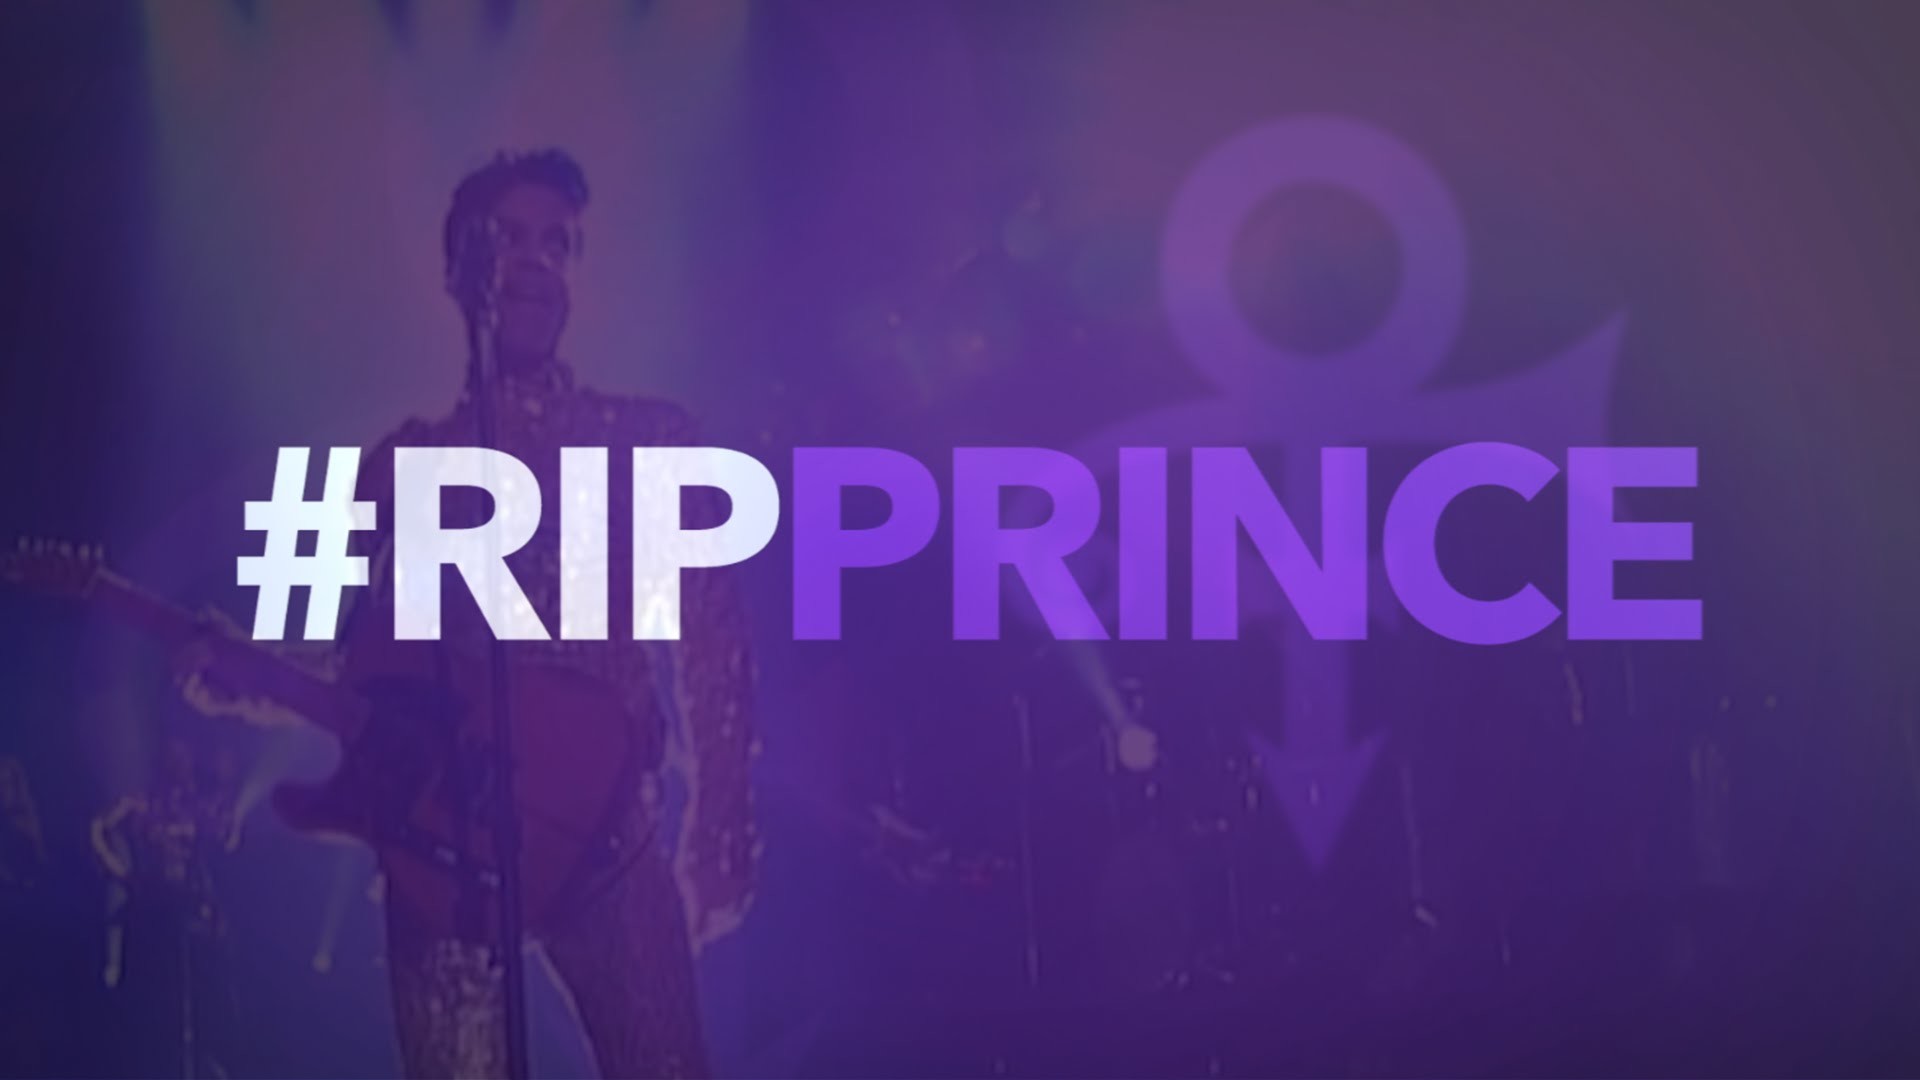 PRINCE Fans Tell Us Why They LOVE the Man The Africa Channel